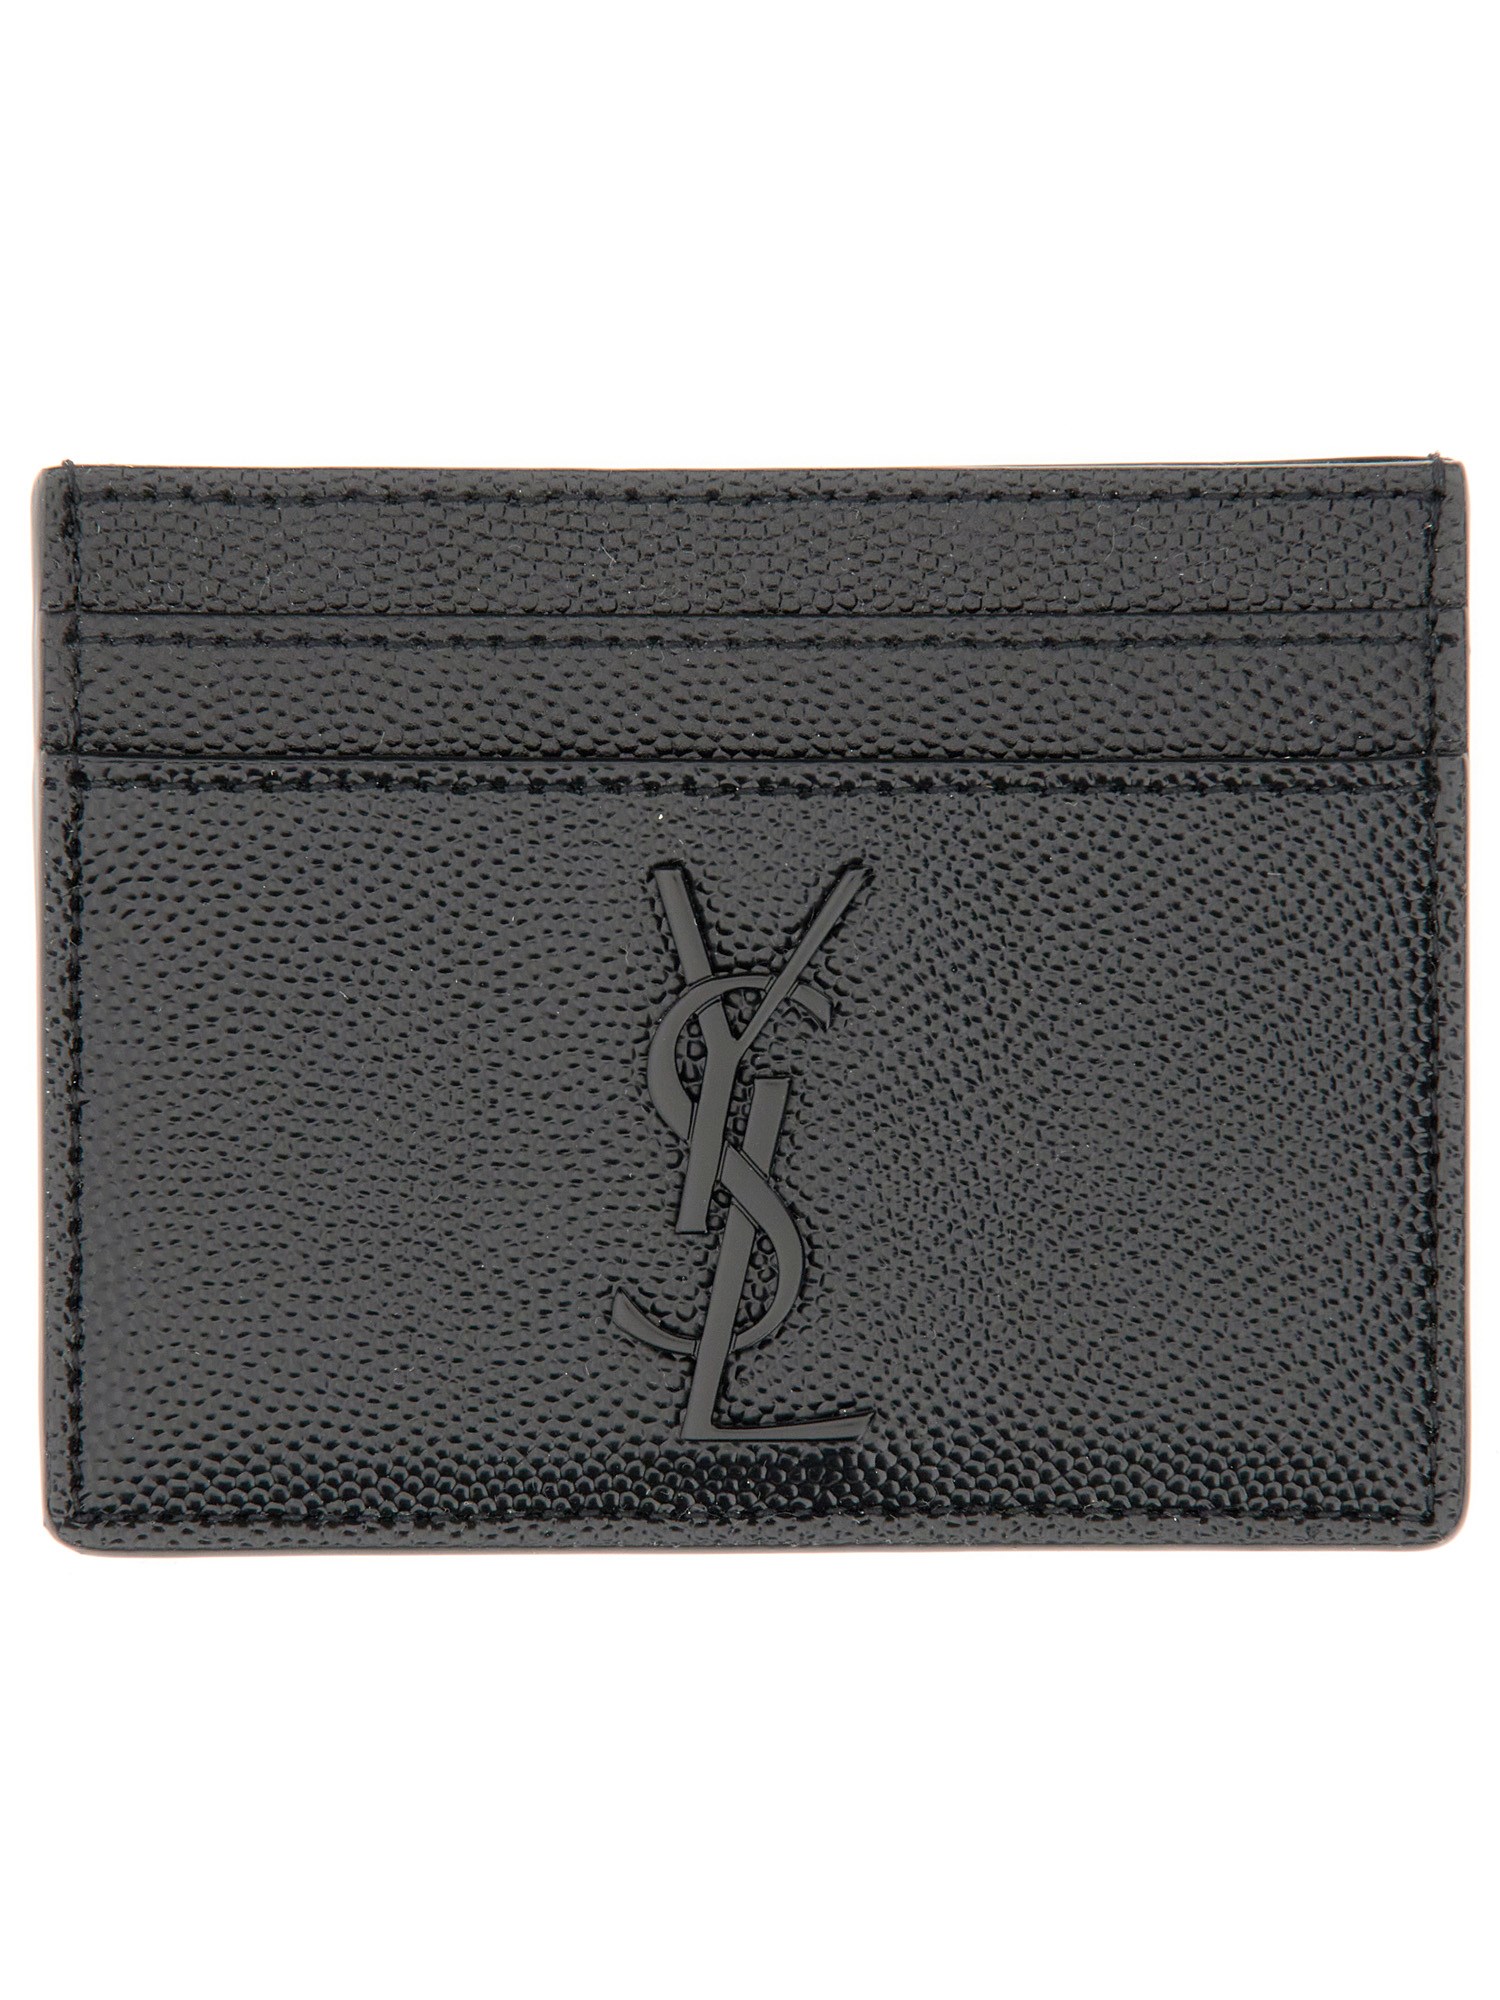 Saint Laurent Card Holder With Logo In Grey